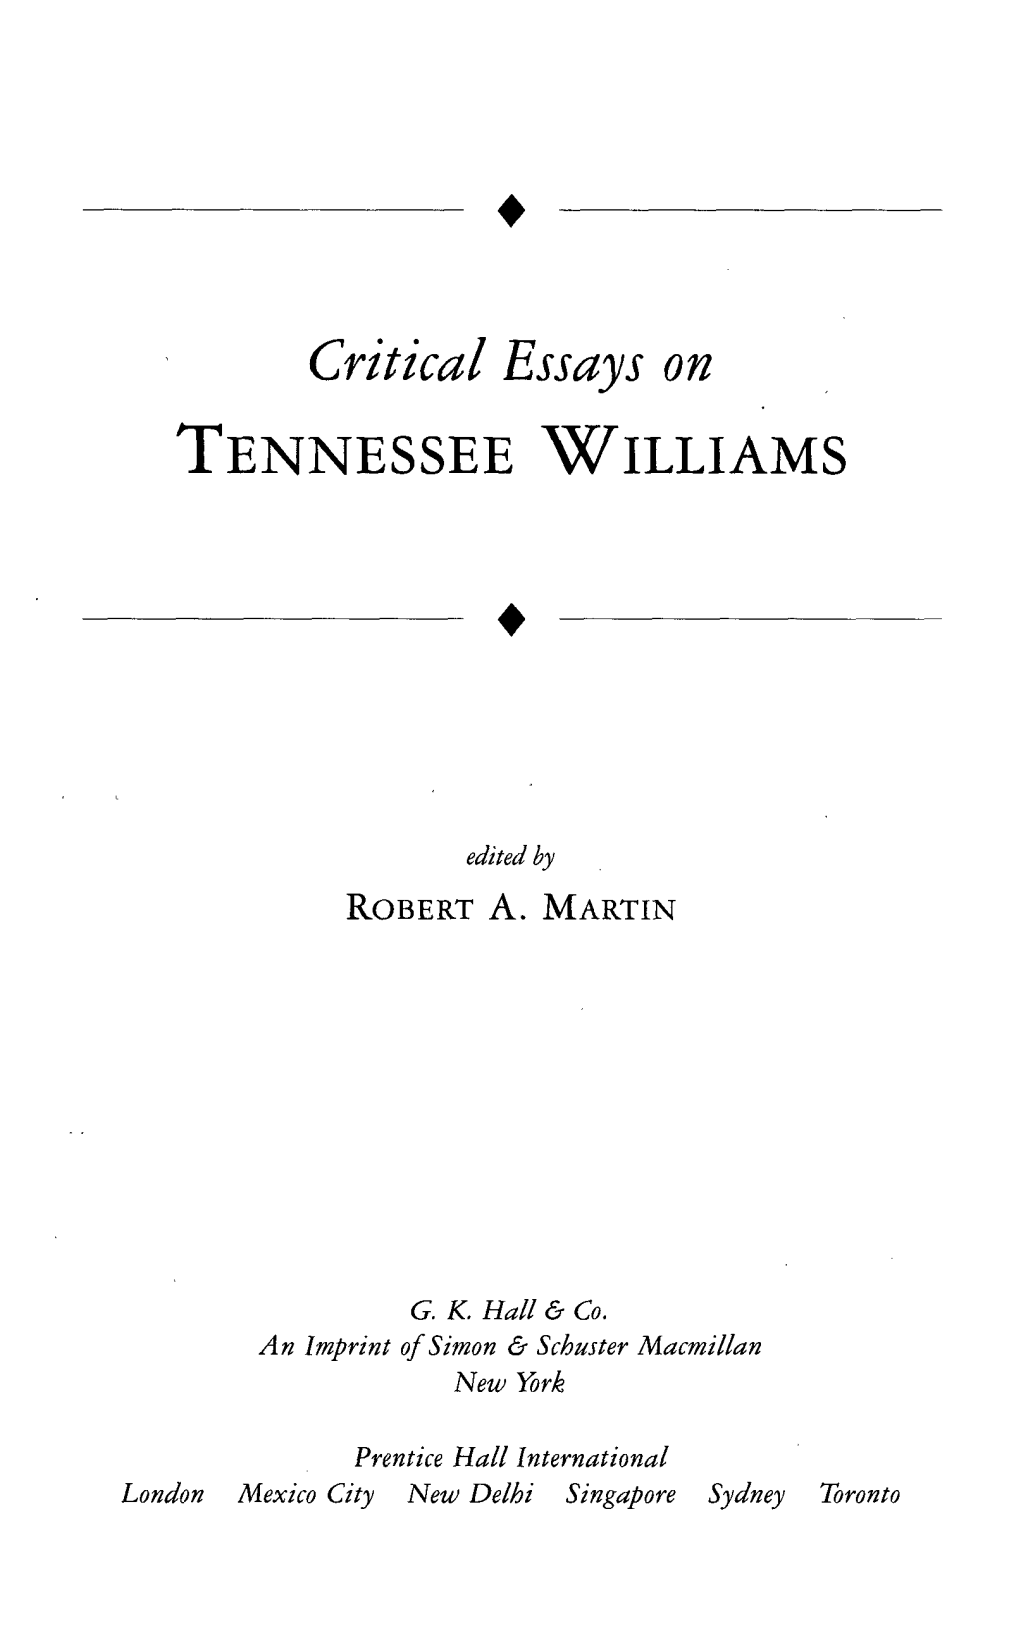 Critical Essays on TENNESSEE WILLIAMS